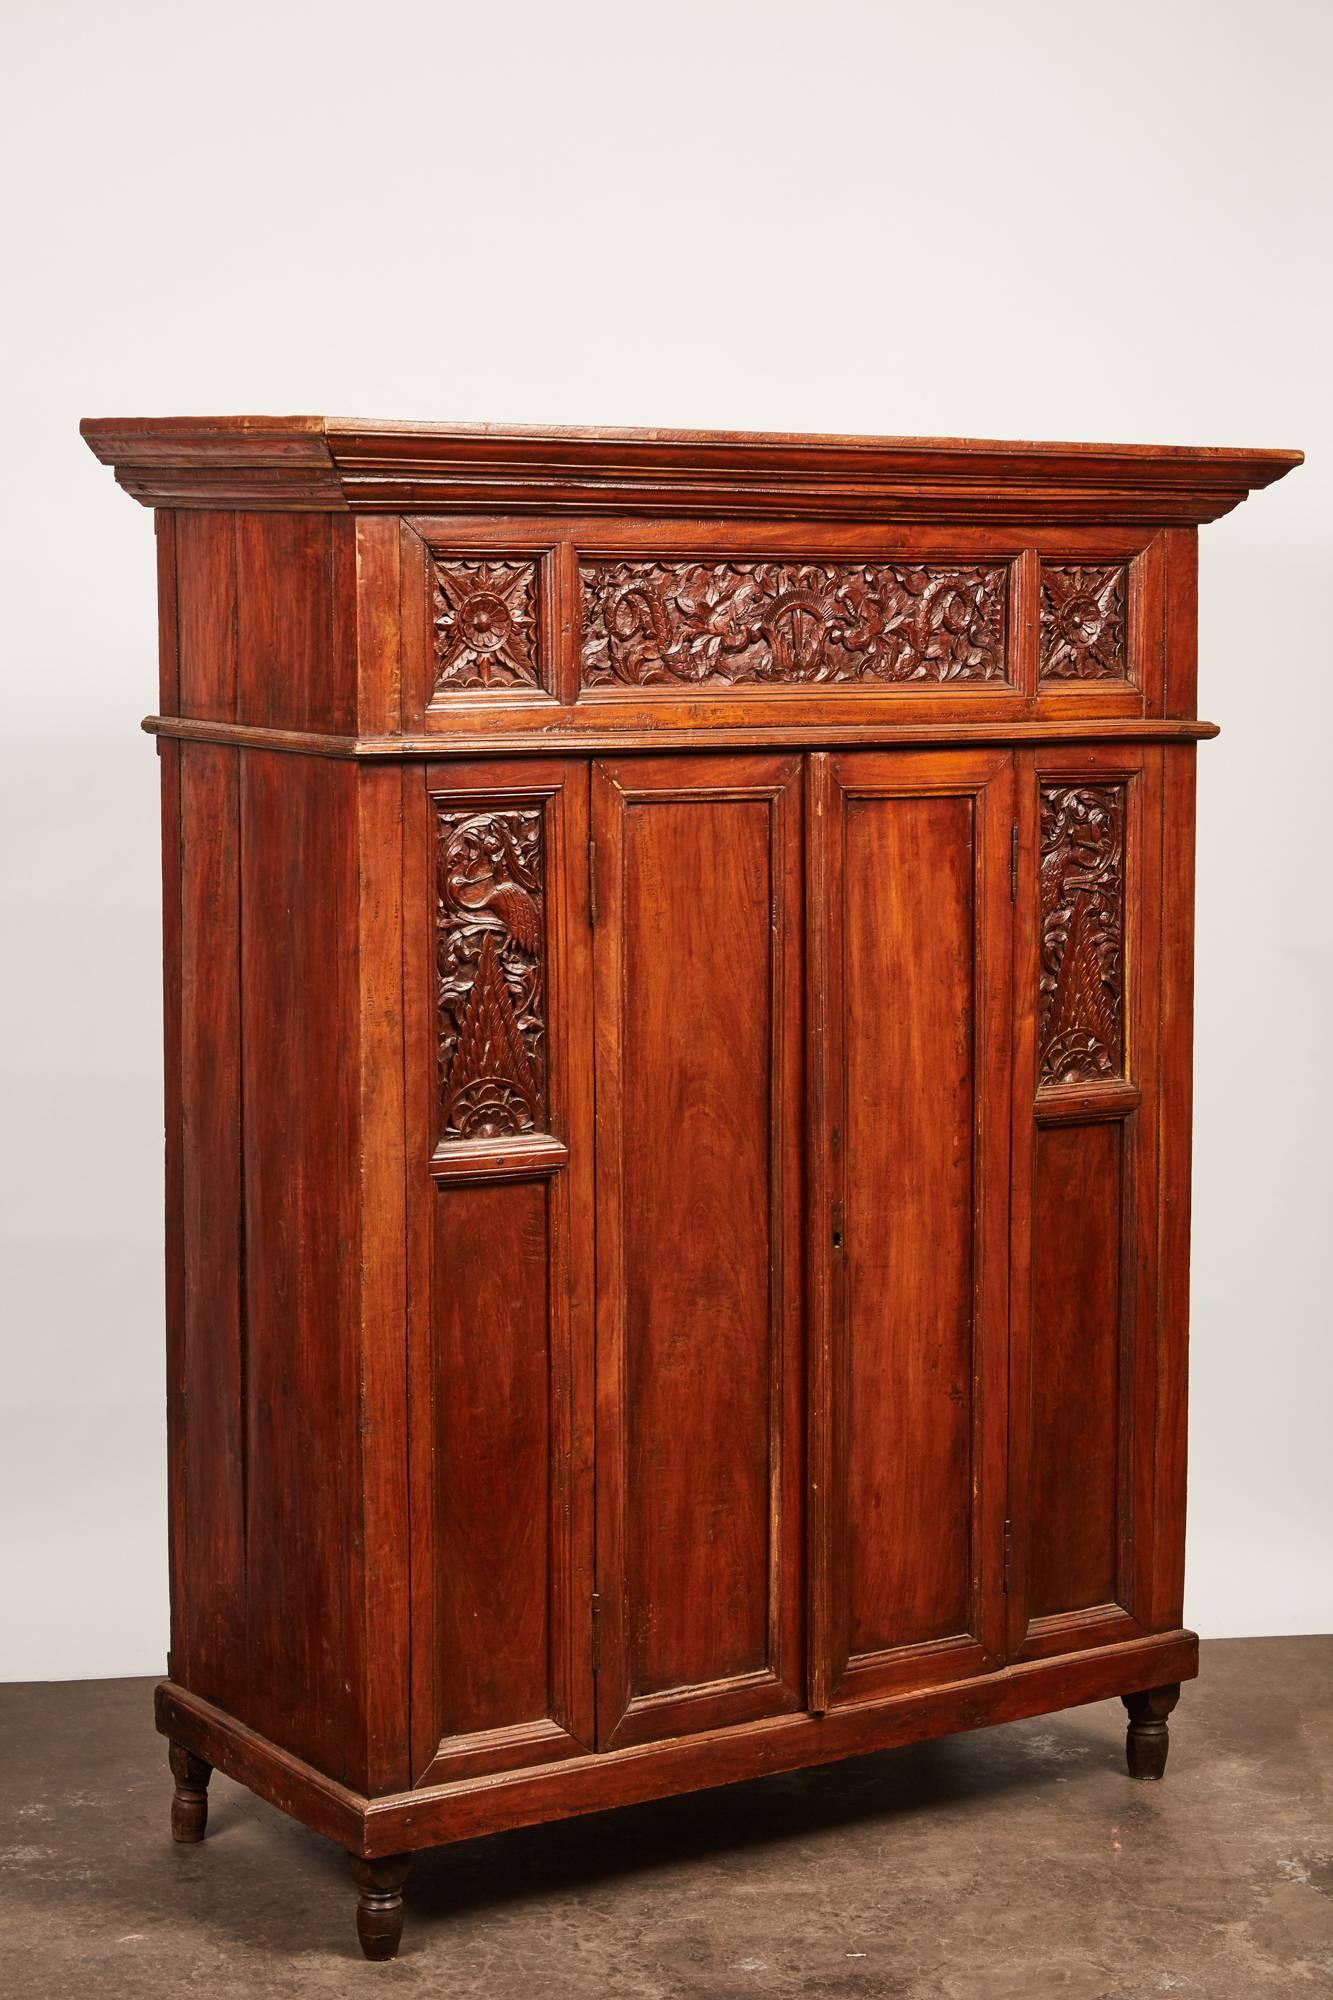 A unique Indonesian cabinet with a flaring cornice above a highly decorative frieze featuring complex carvings of foliage and dragon designs. Along the frame of the thin pair of doors there is another set of intricate carvings of peacocks and